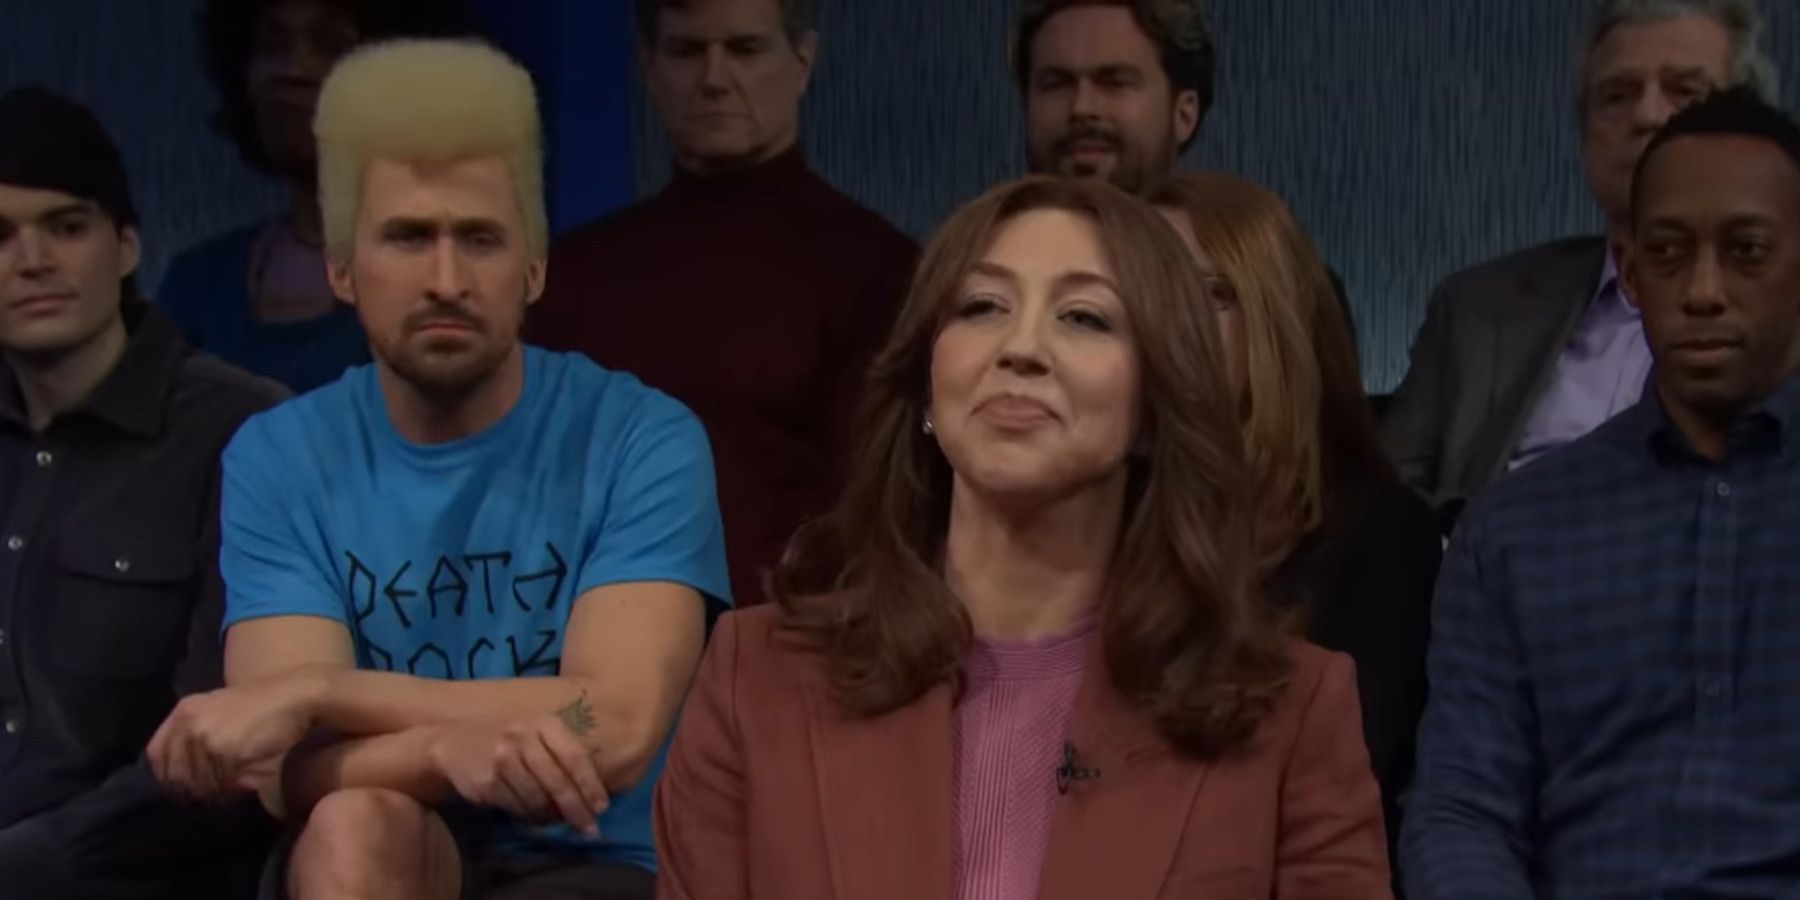 "This Makes Me Feel Almost...Unprofessional": SNL Star On Laughing During Viral Sketch With Ryan Gosling